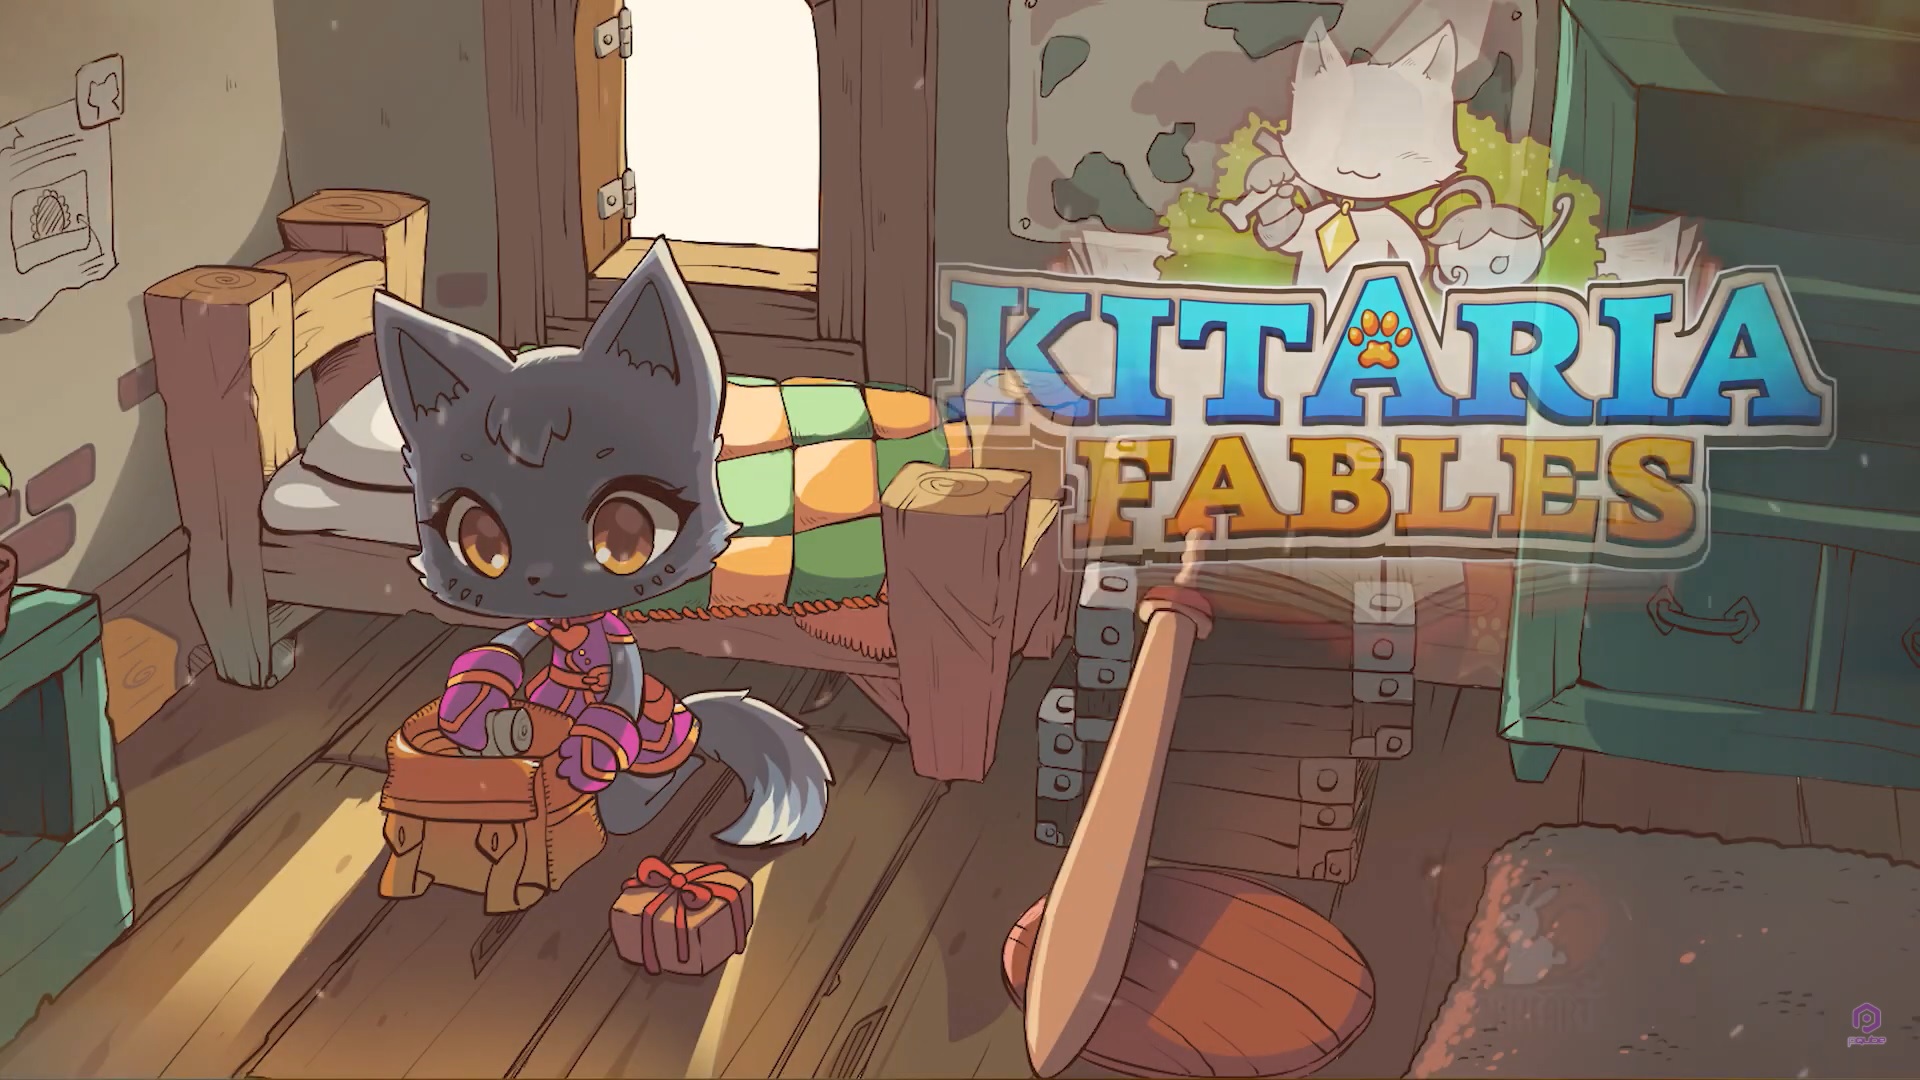 kitaria fables ps4